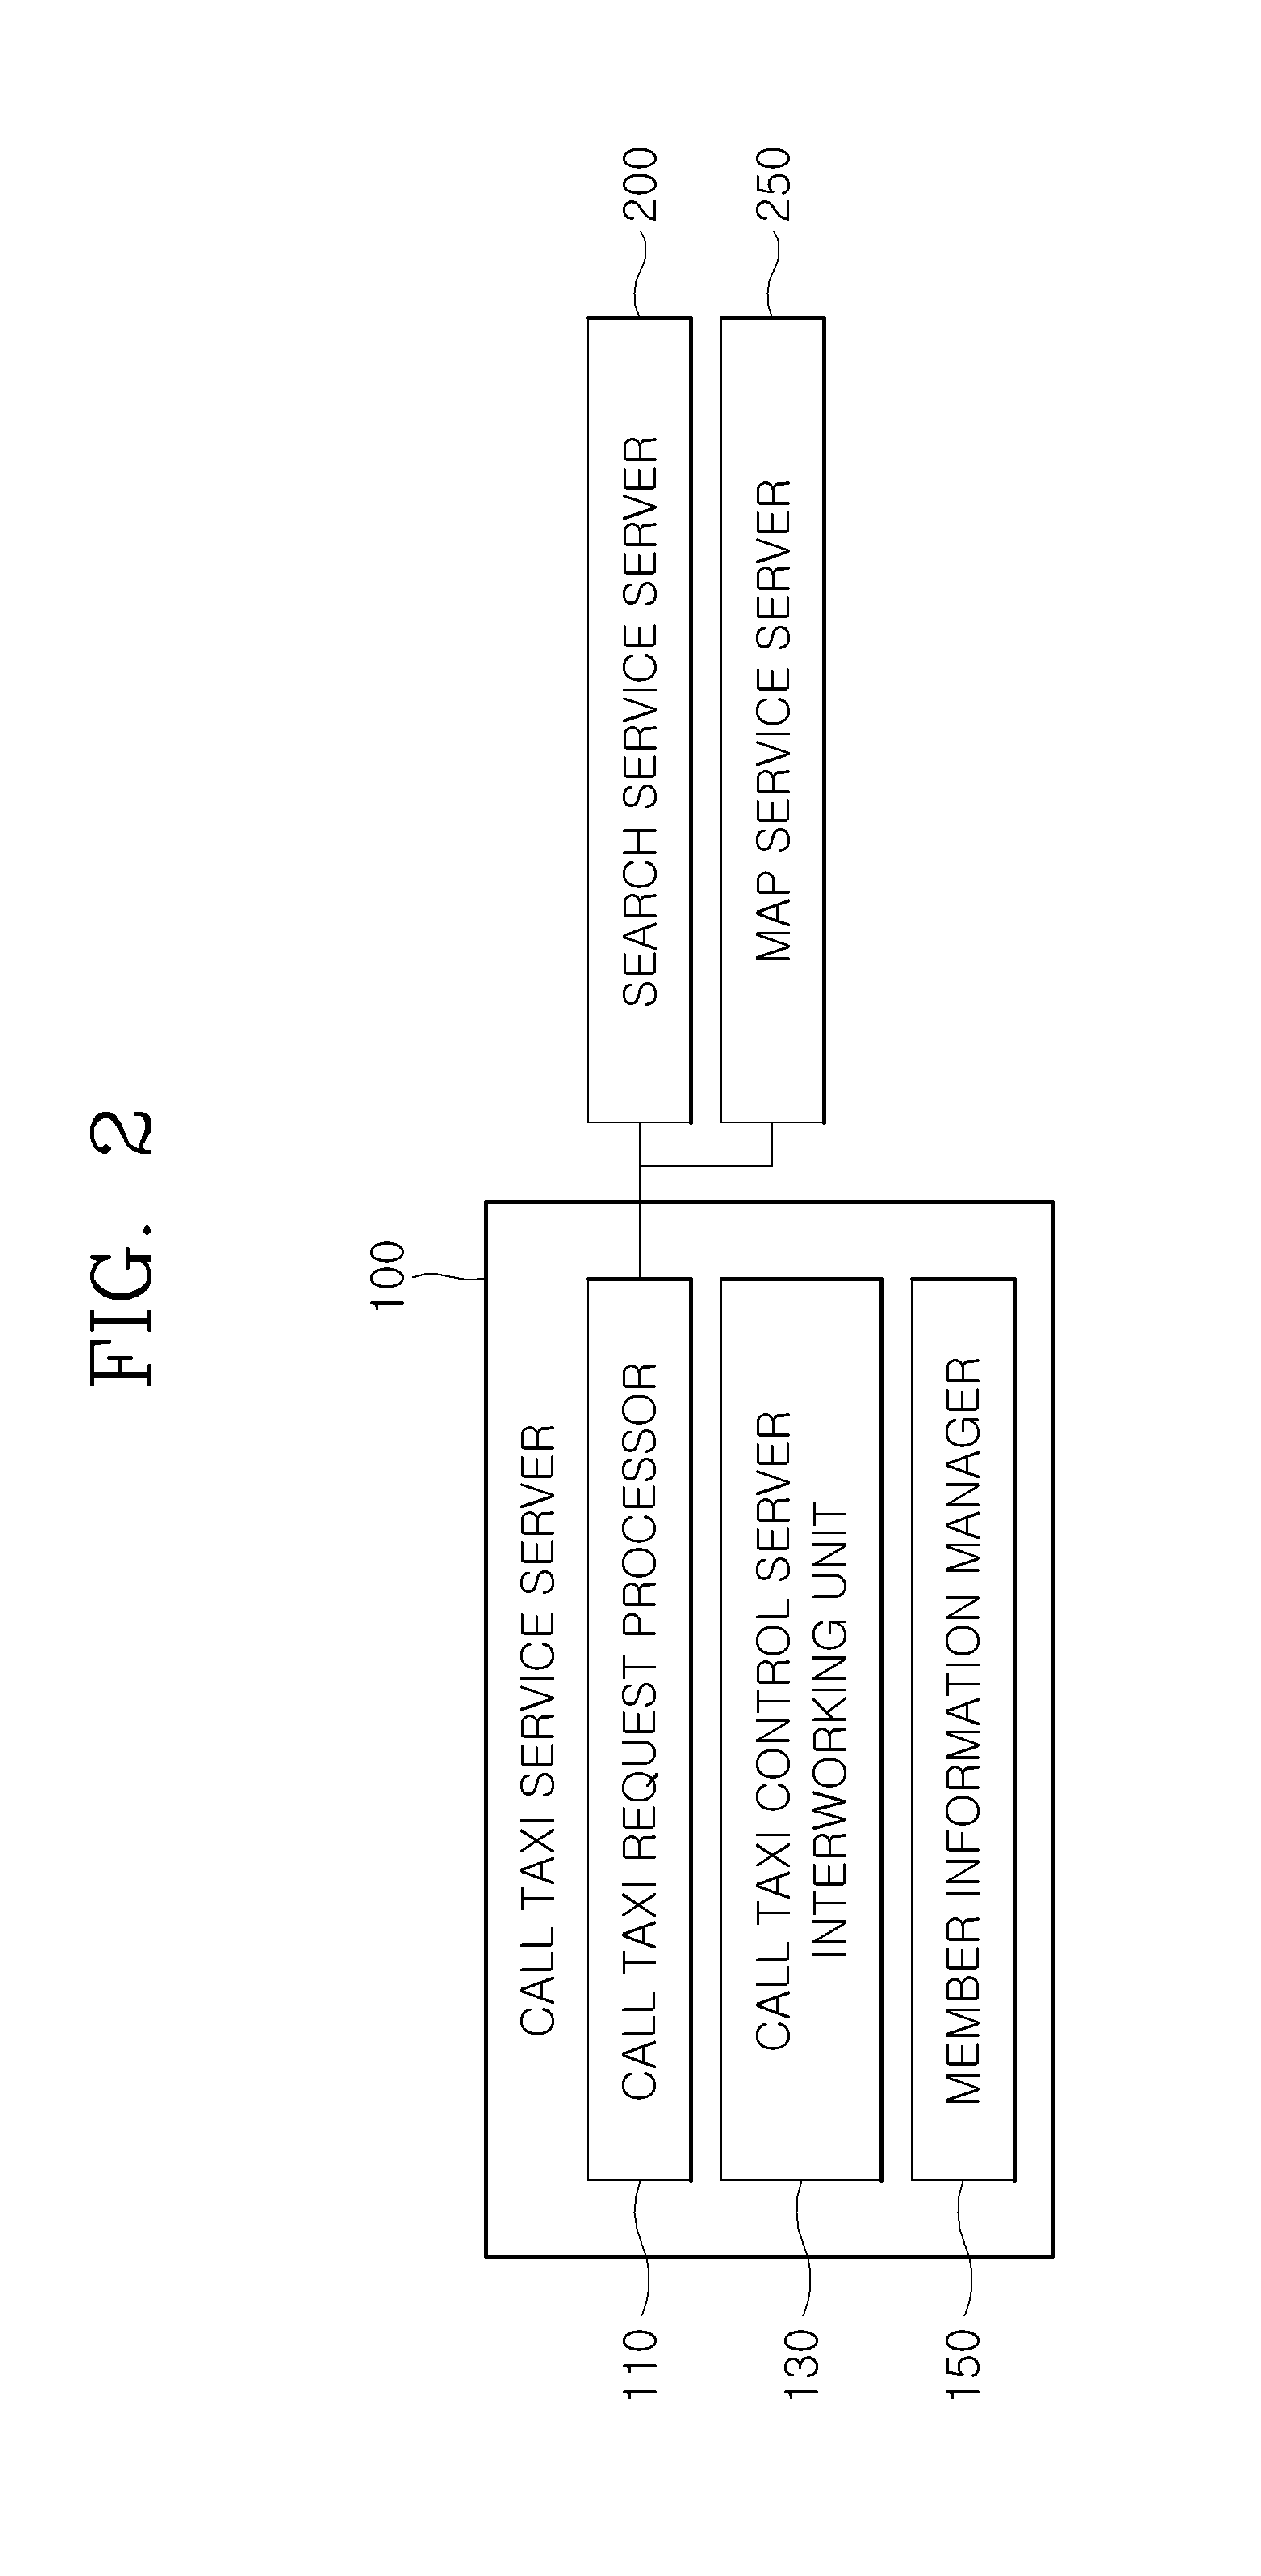 Method of providing call taxi service and call taxi service server